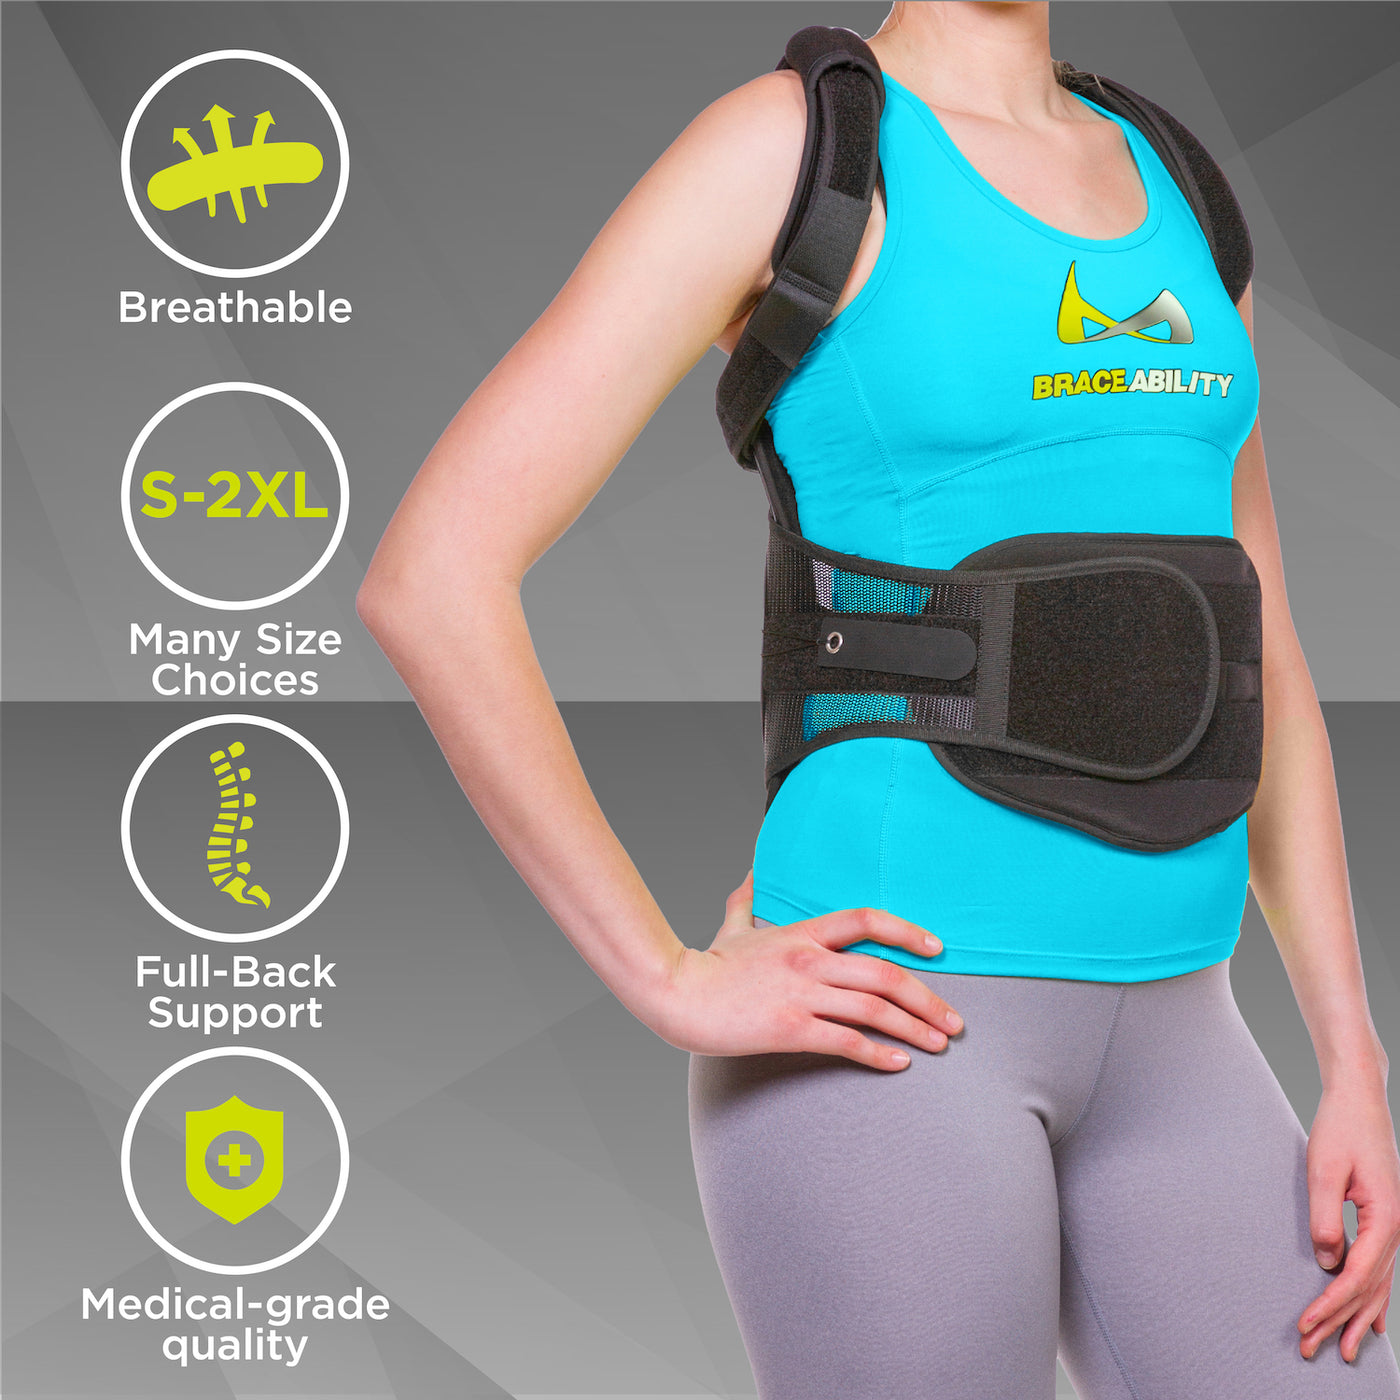 LUMBAR BACK BRACE WITH C-H PACK, OSFM, Back Support Braces